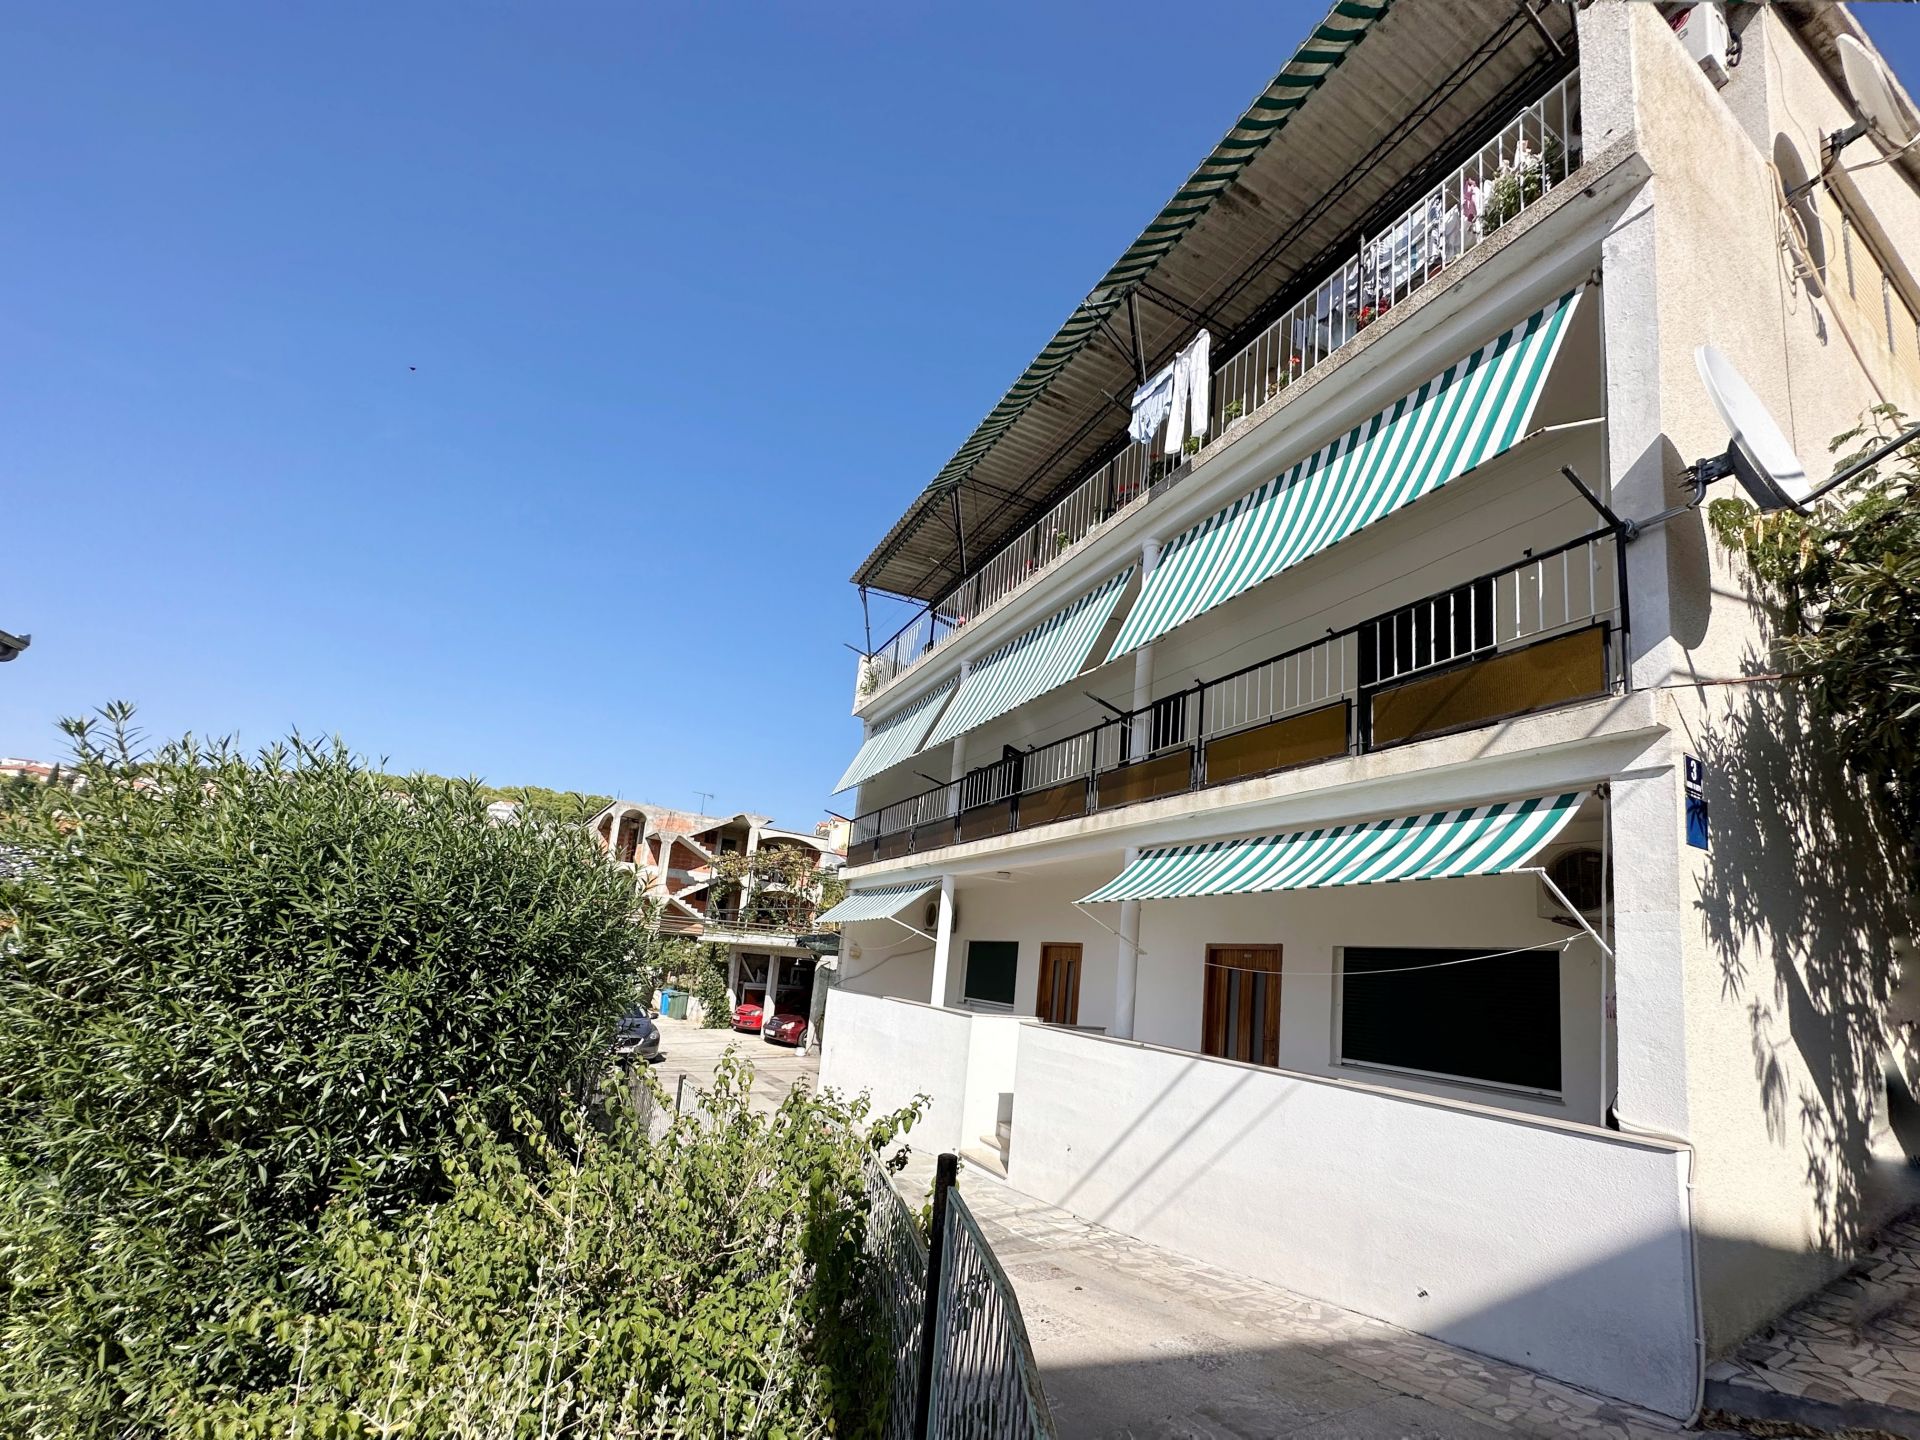 Apartments Kaza - 50m from the beach with parking: A1(2), A2(2), A3(6) Trogir - Riviera Trogir 